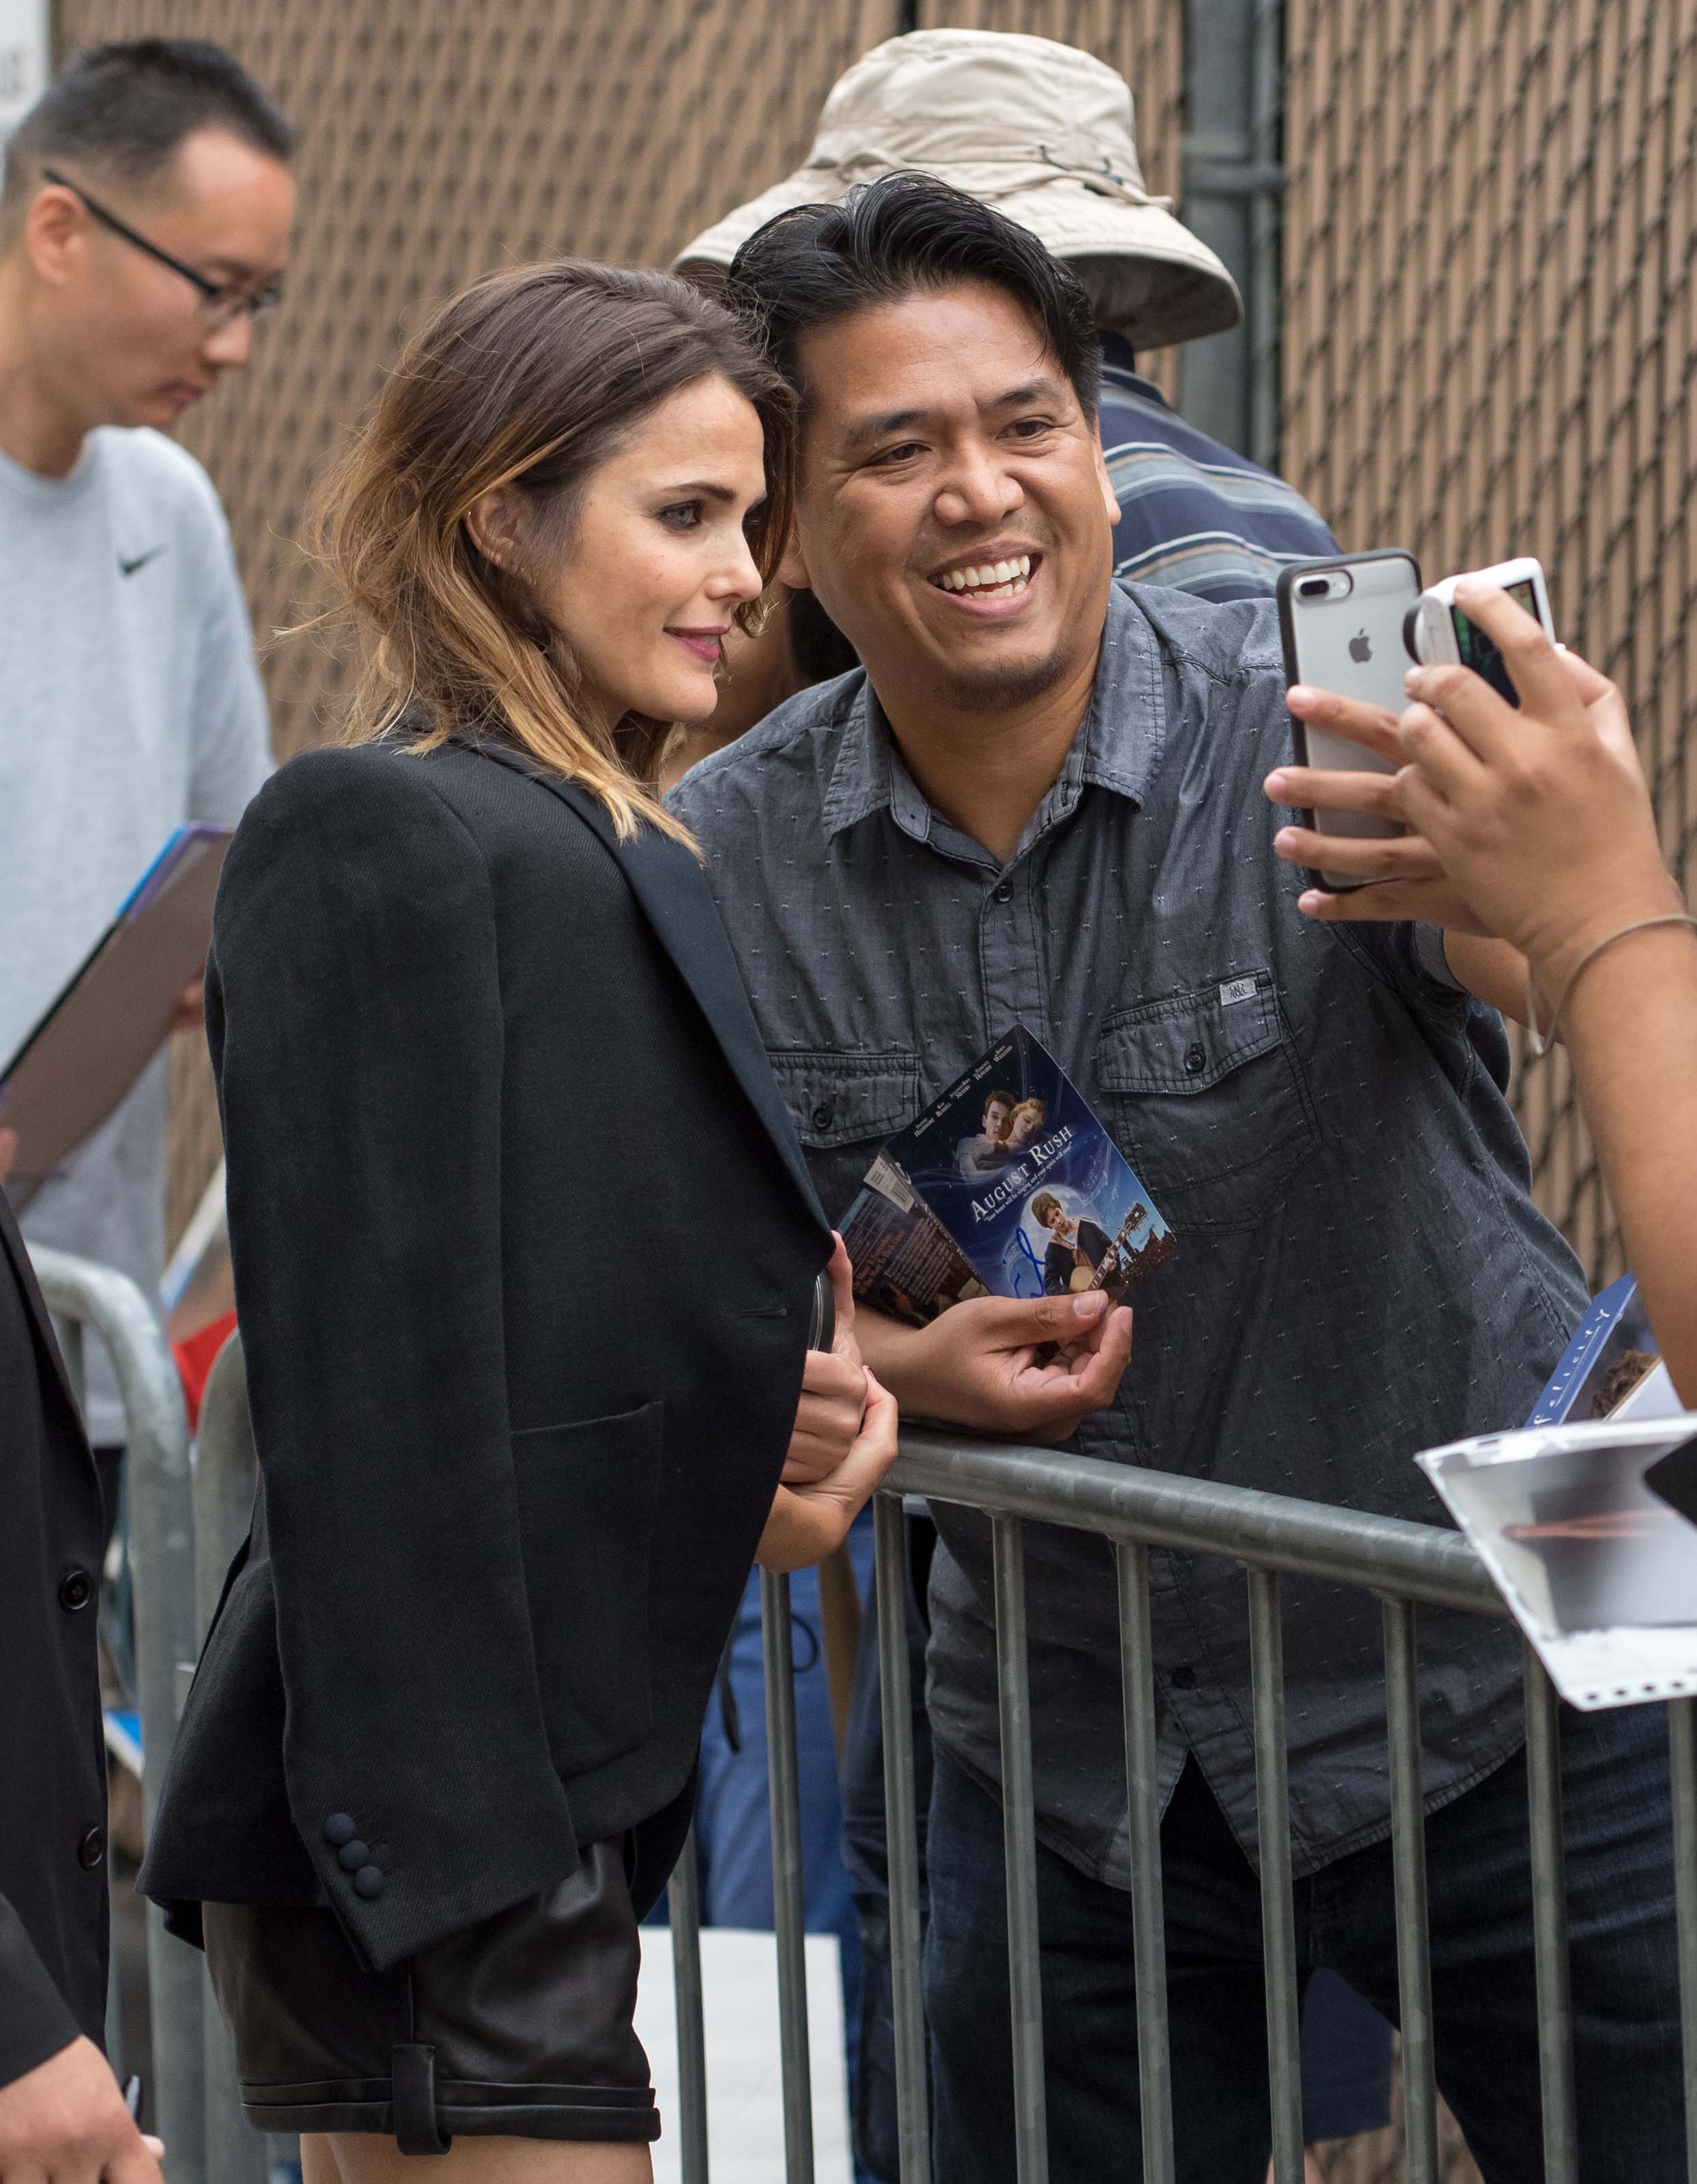 Keri Russell arriving at Jimmy Kimmel Live